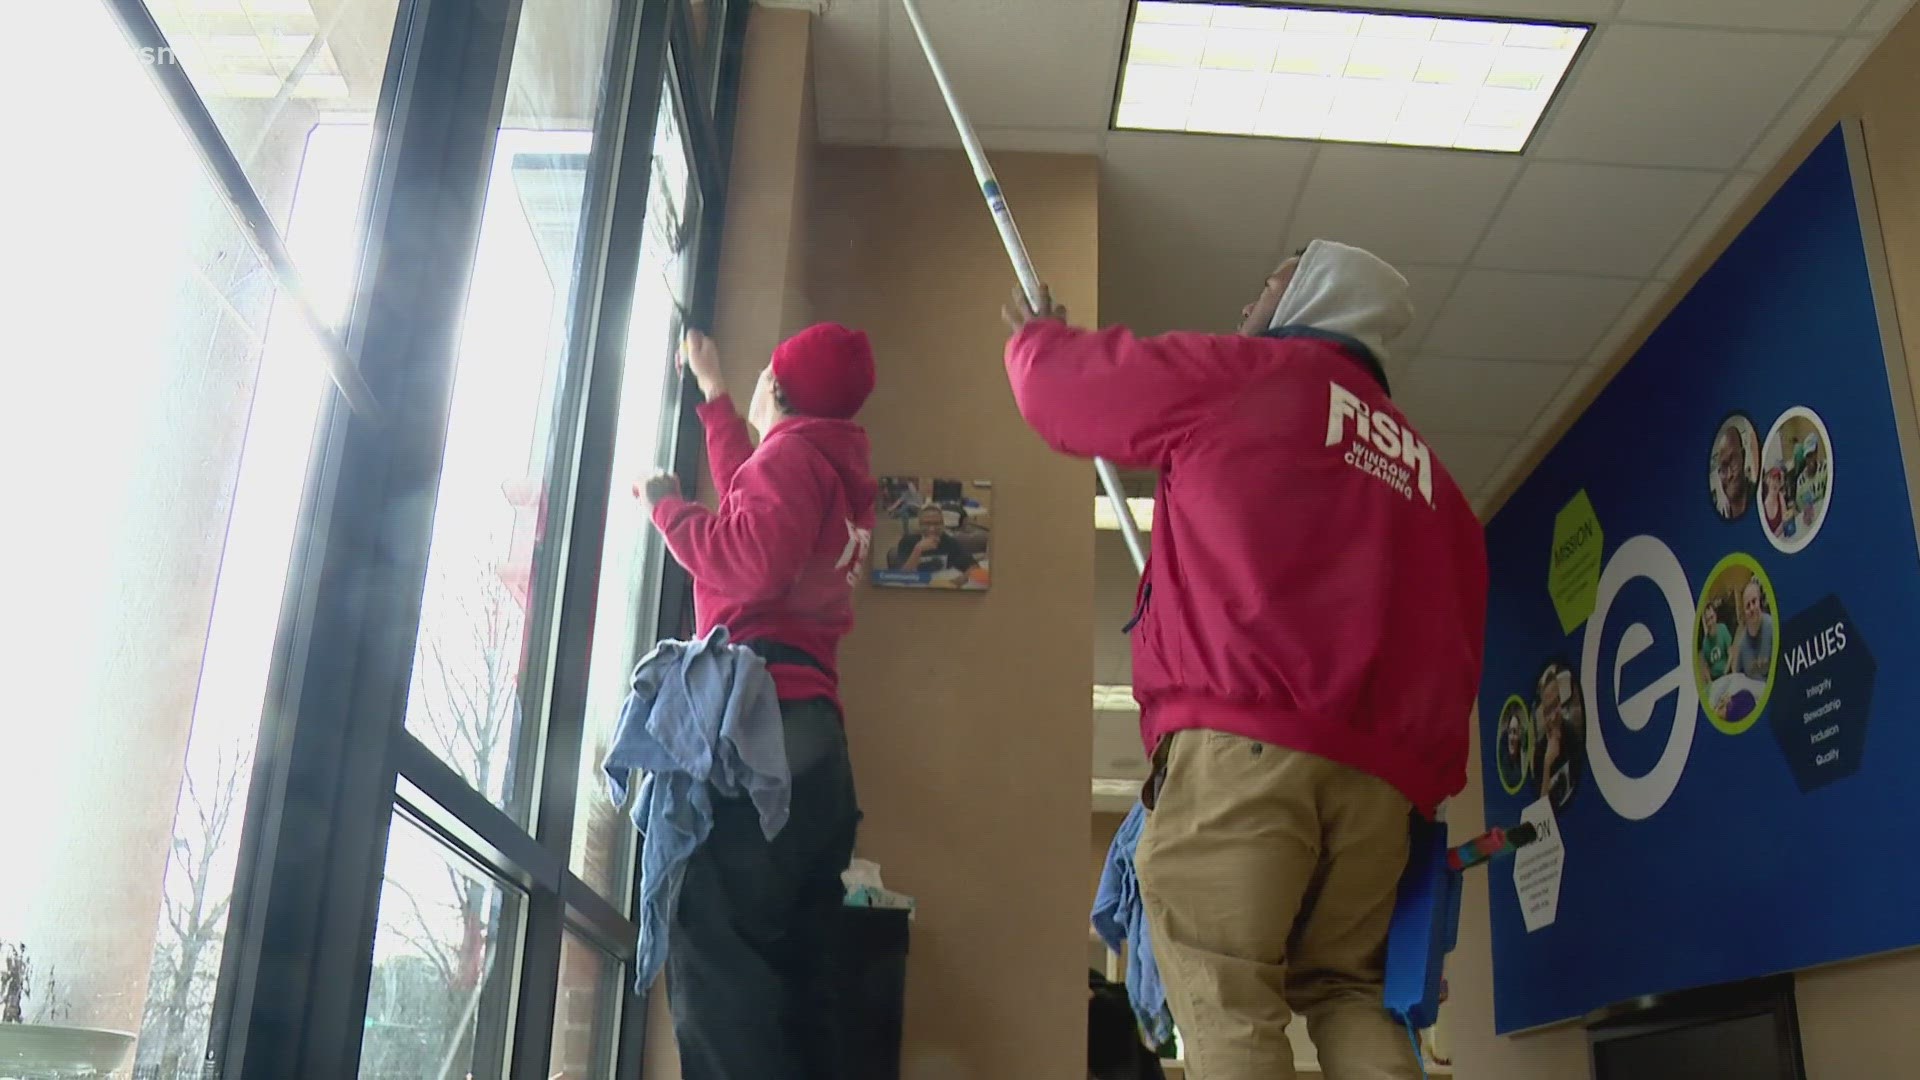 Each year, Fish Window Cleaning gives back to the community by showing how a simple gesture can impact others.